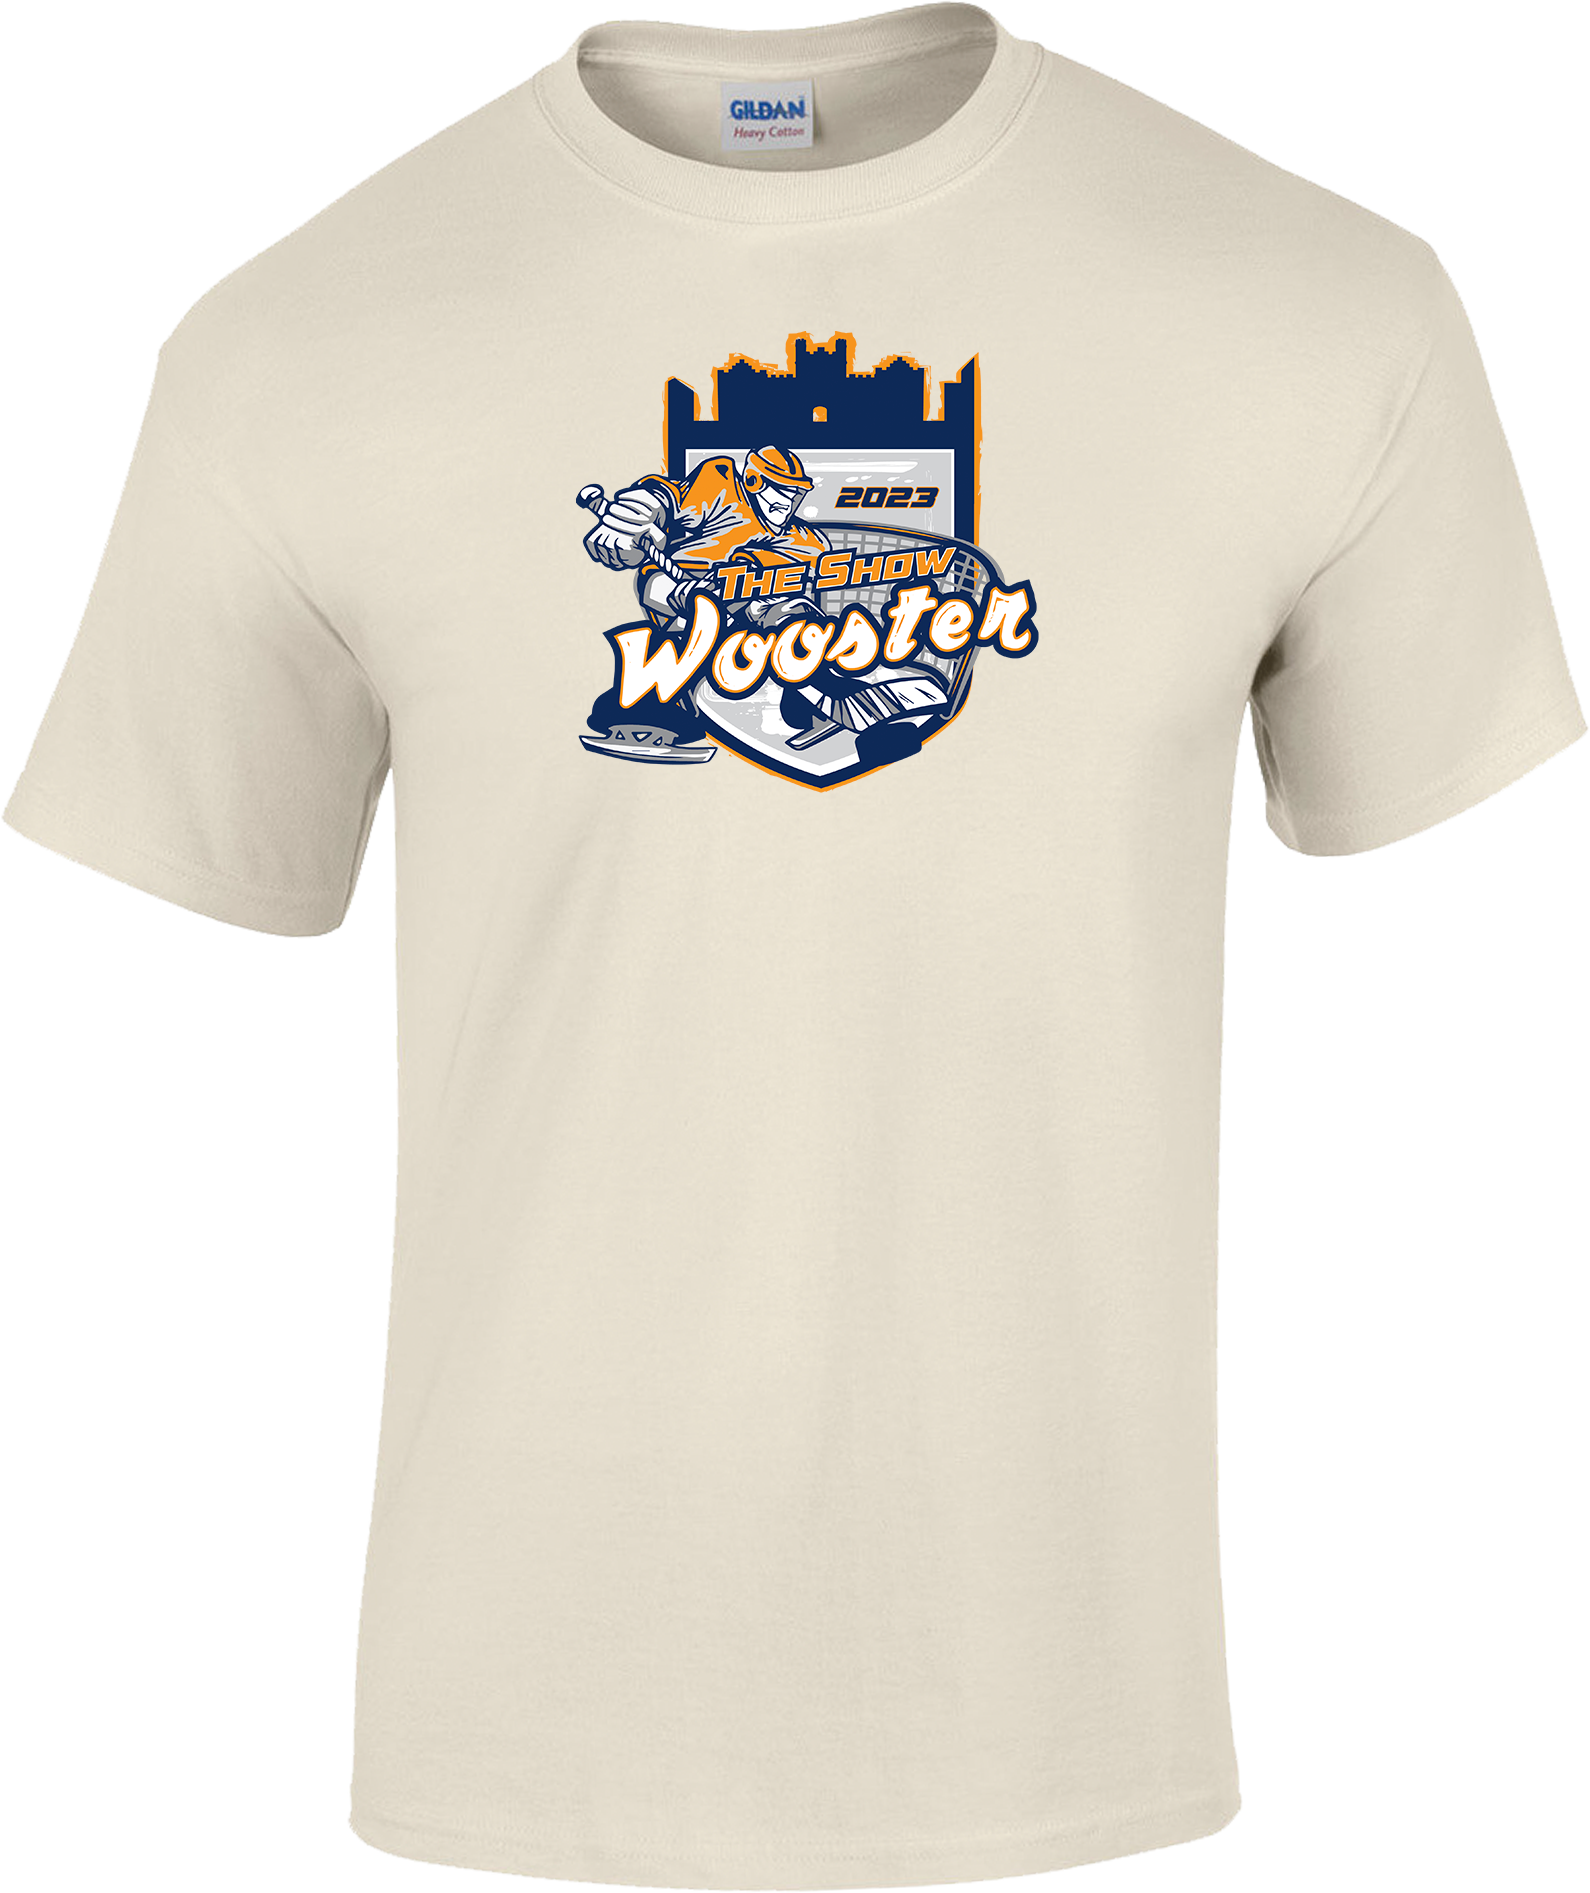 SHORT SLEEVES - 2023 The Show Wooster